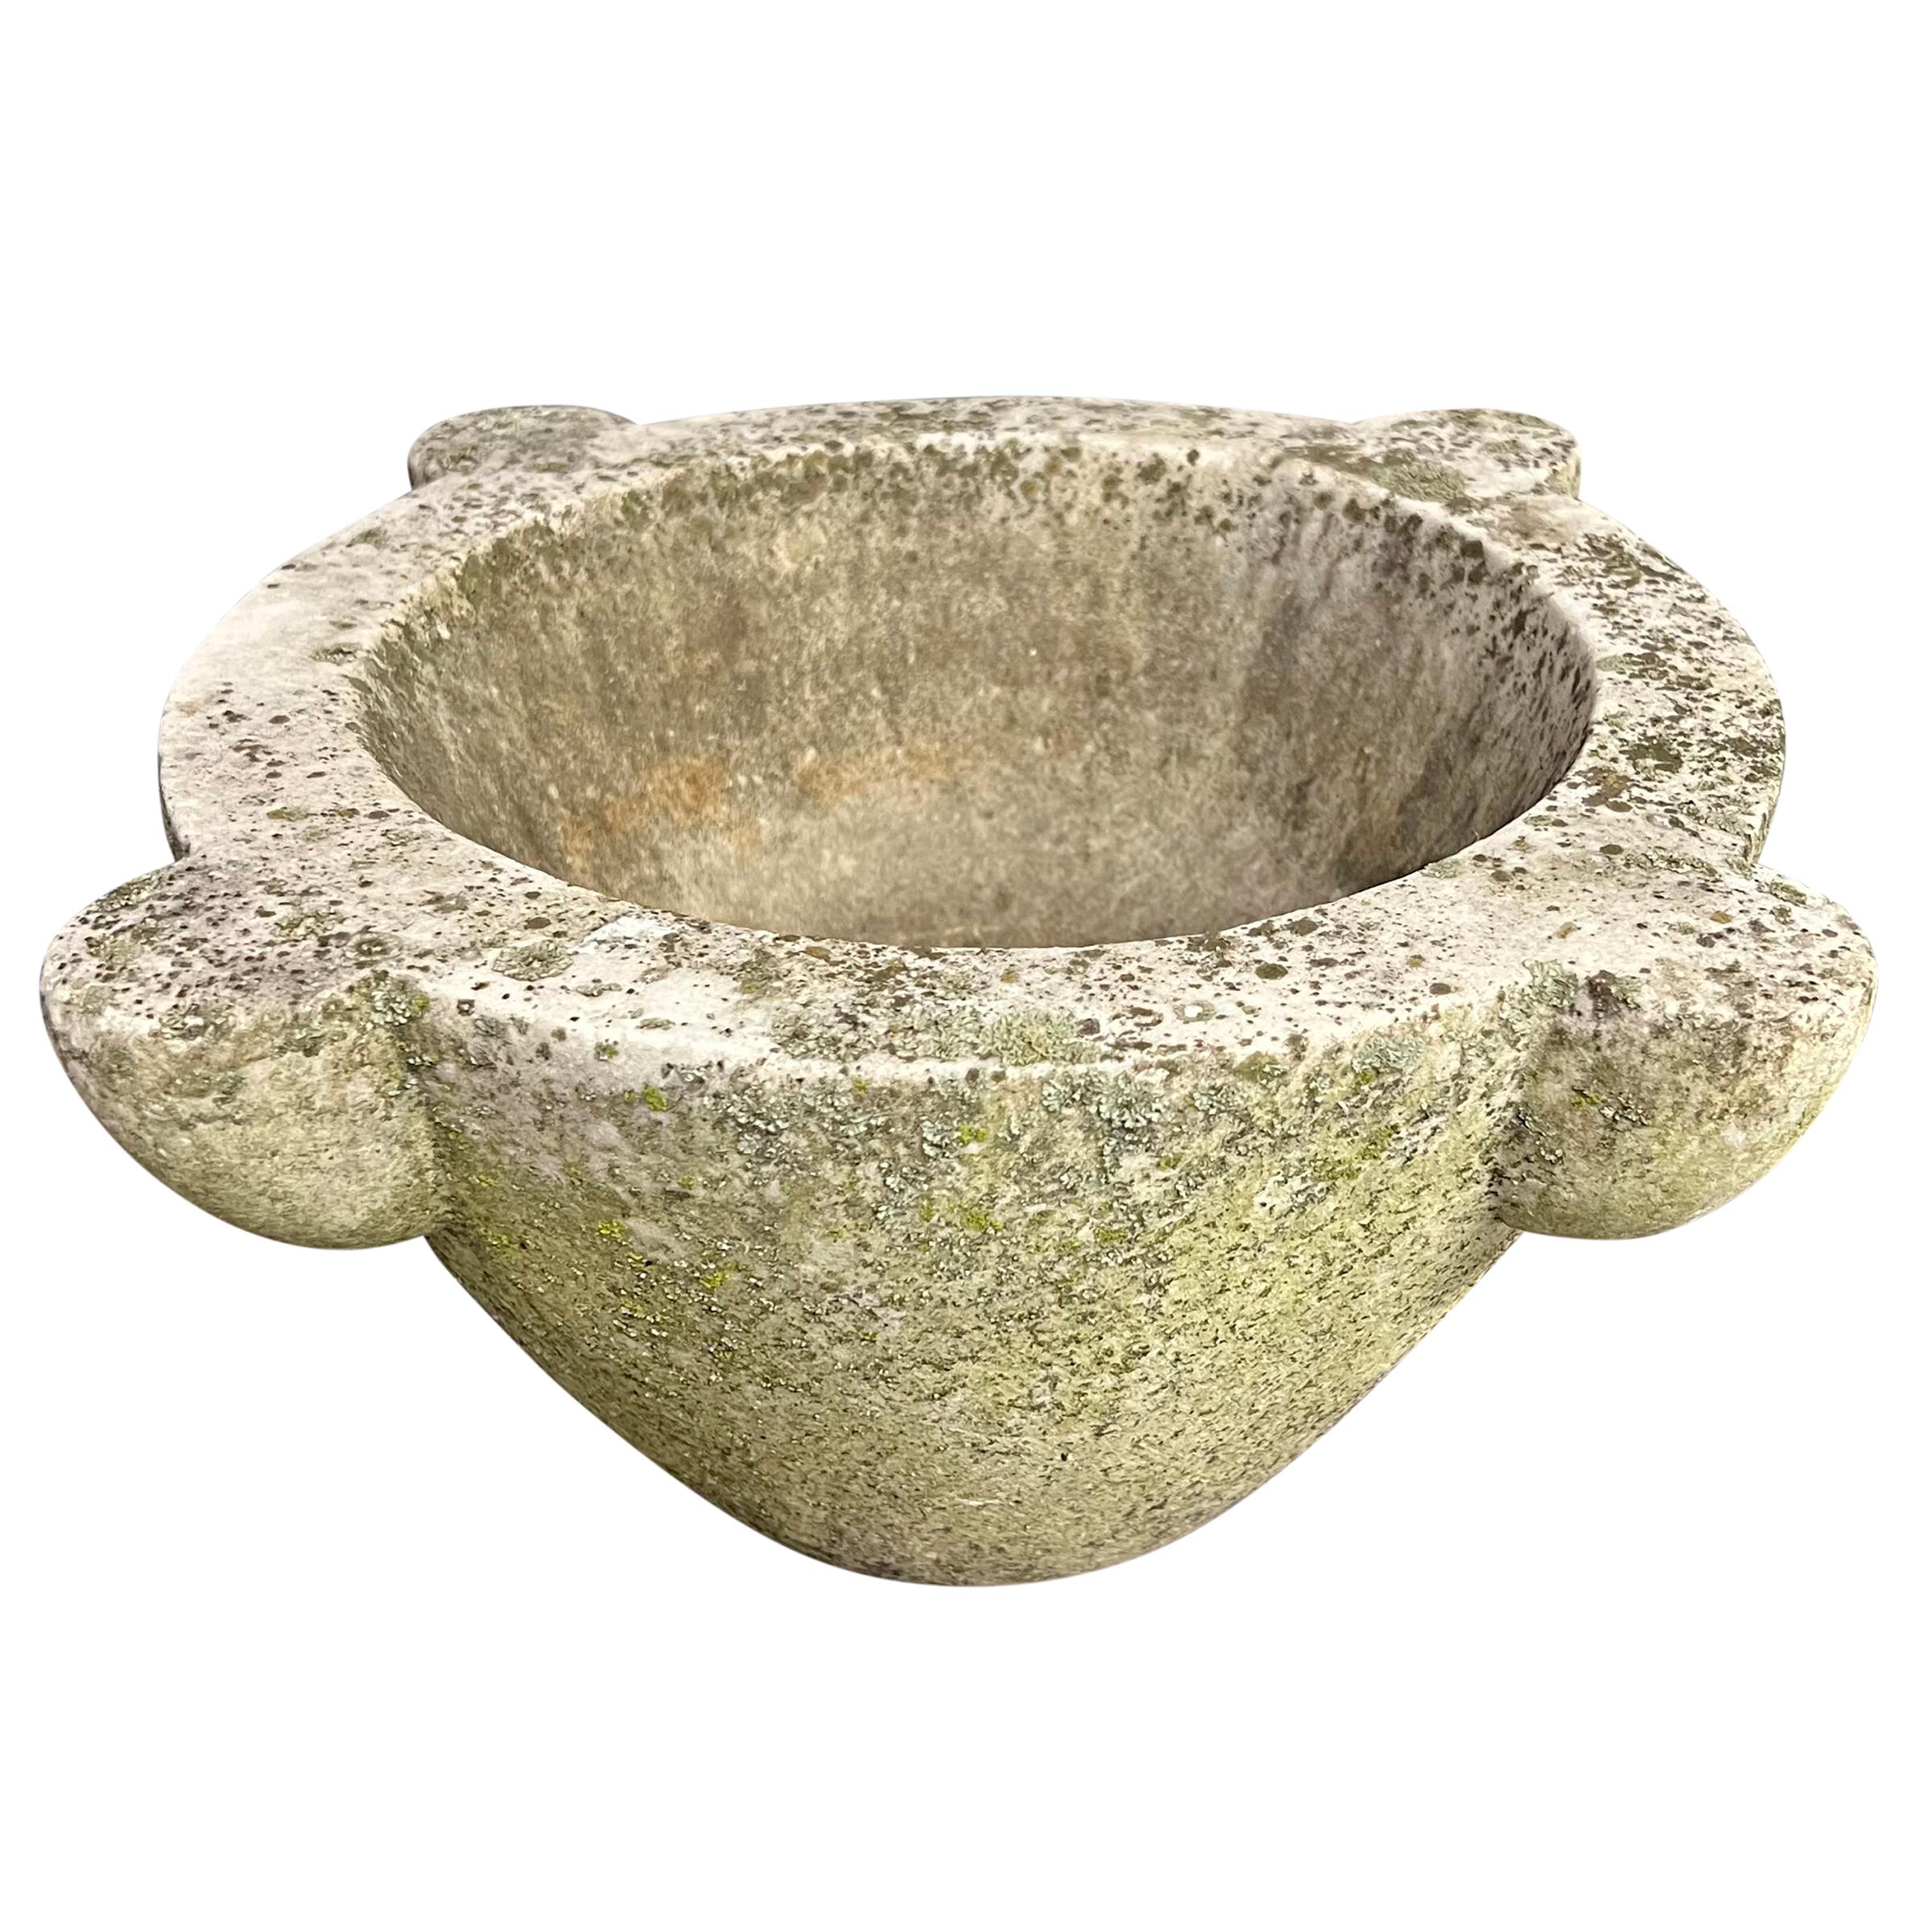 19th Century French Moss and Lichen Covered Marble Mortar In Good Condition For Sale In Chicago, IL